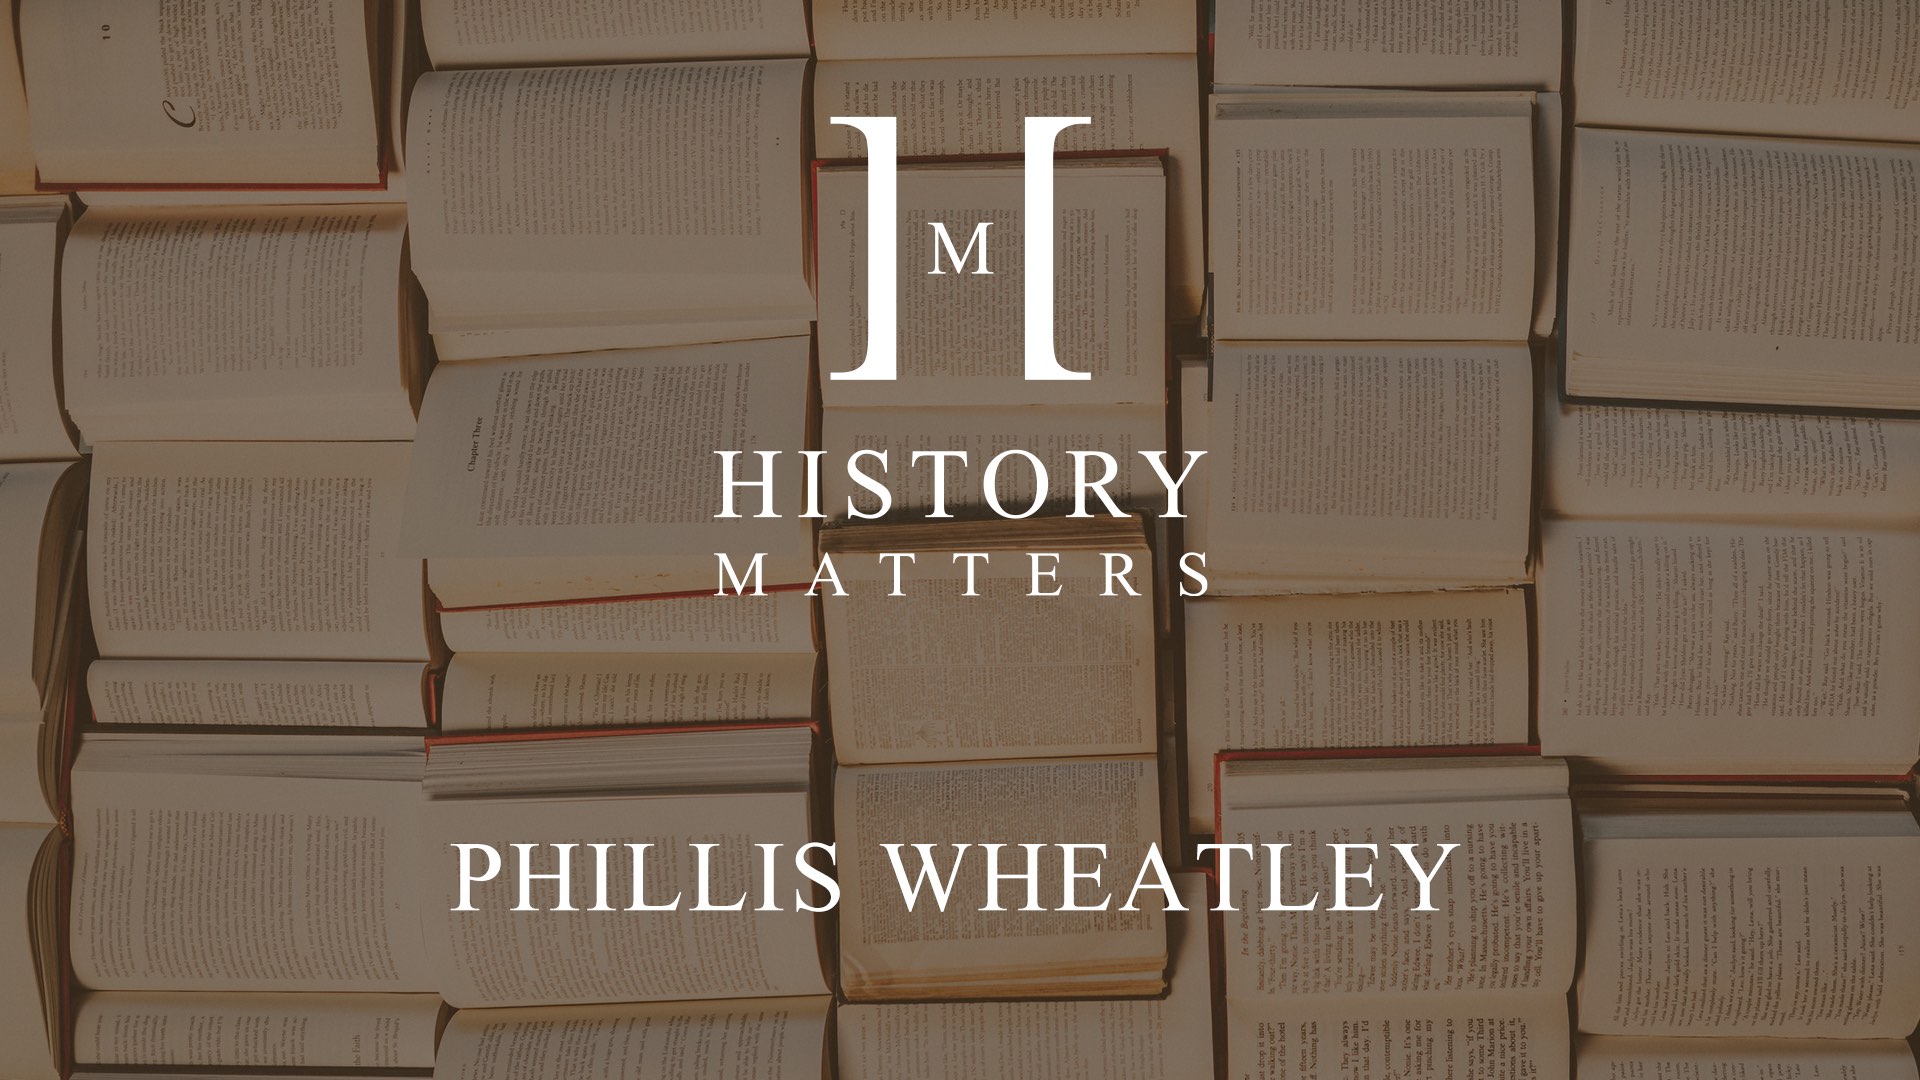 IU C&I Studios Page White HM Phillis logo with dimmed background of a bunch of opened books on display